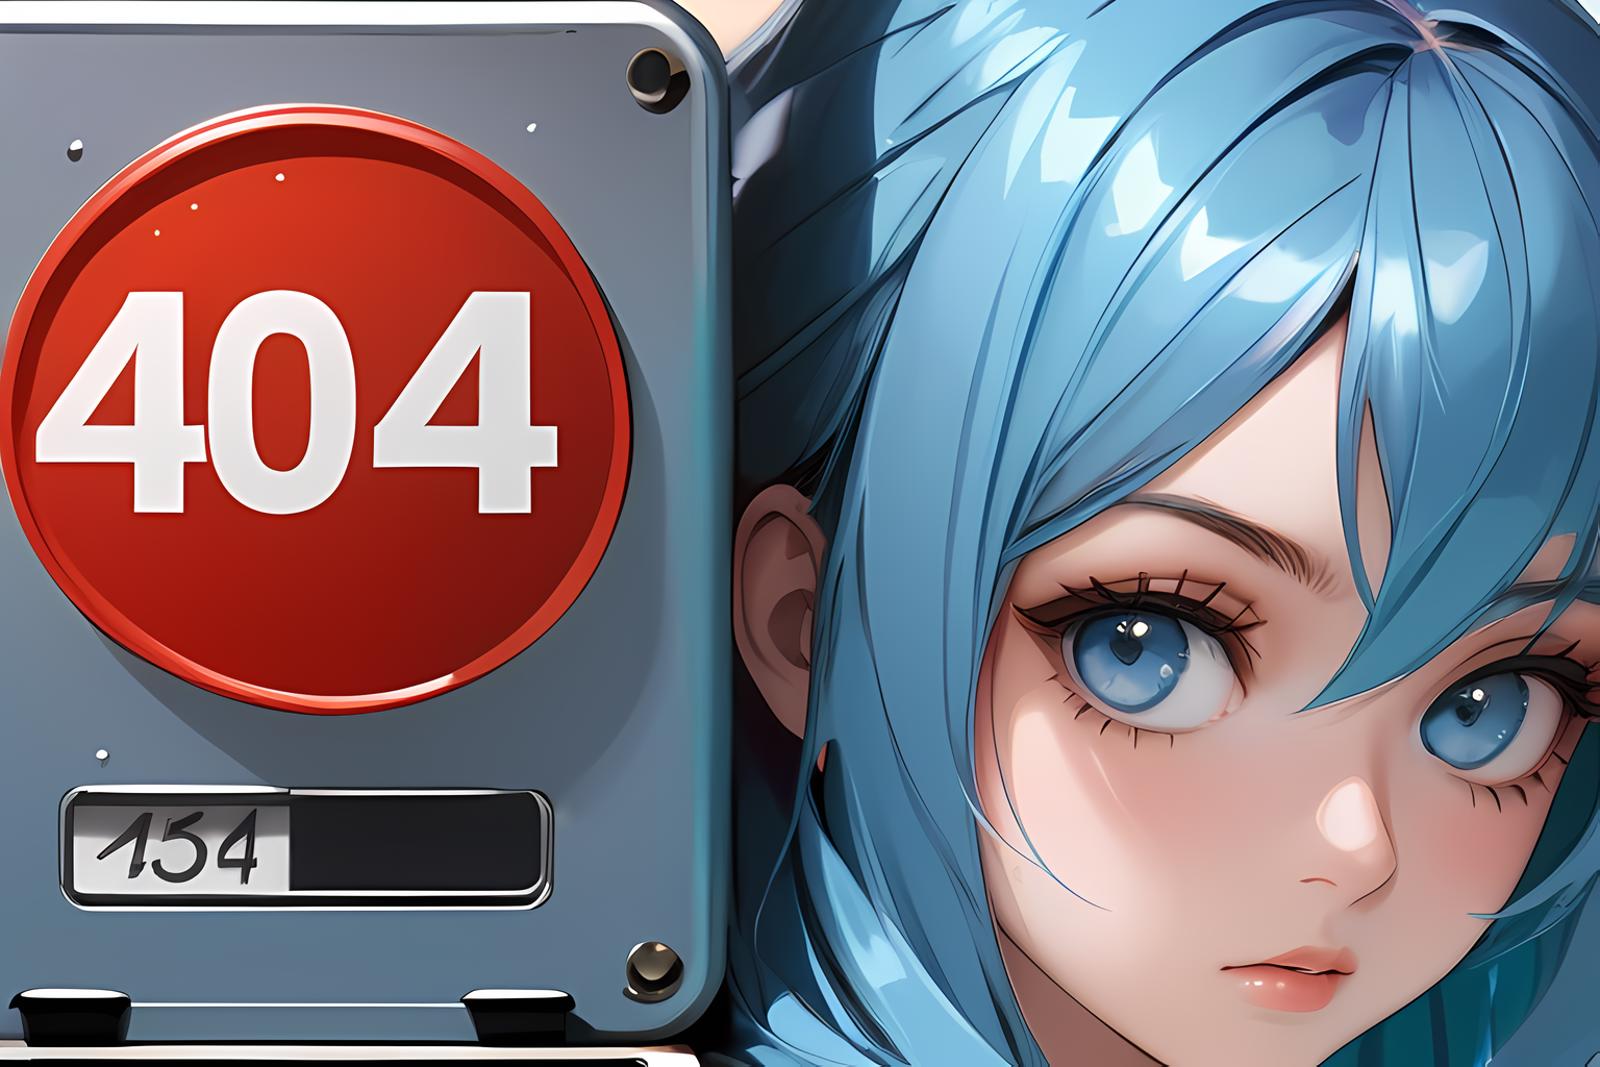 A close-up of a blue haired woman next to a red 4 on a box.